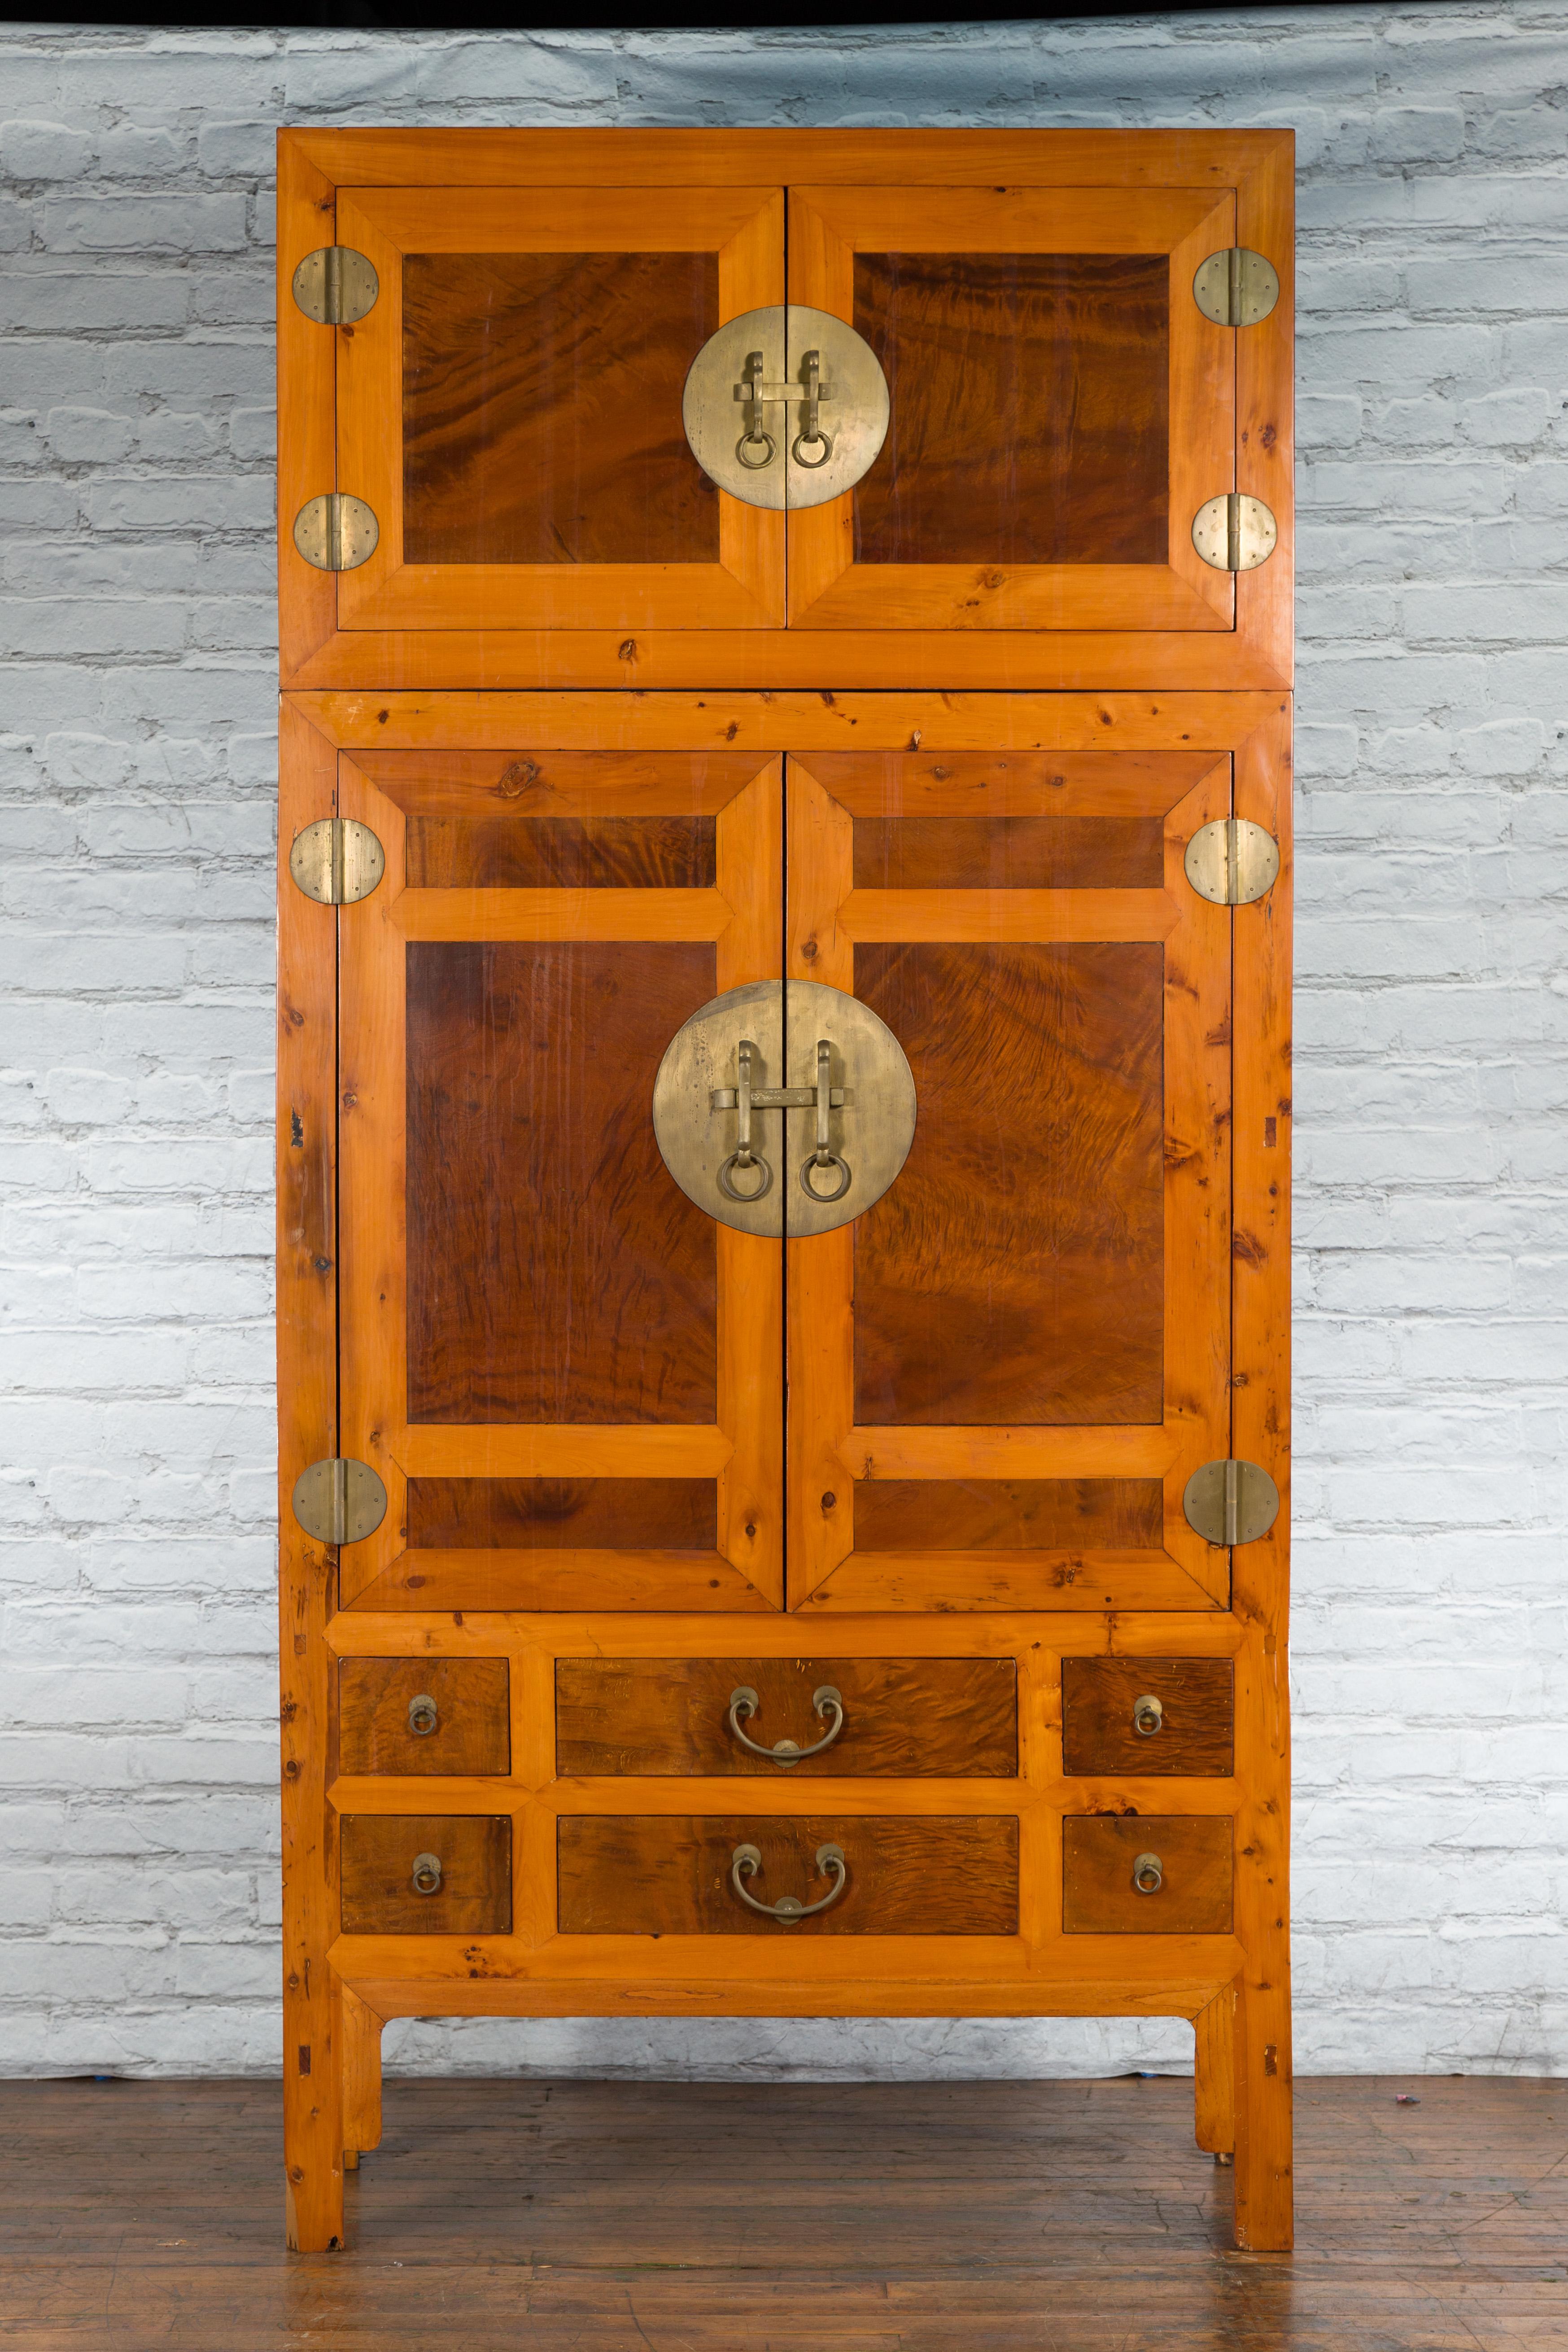 A large Chinese Hebei Turn of the Century burled wood two toned compound cabinet from the early 20th century, with four doors, multiple drawers and brass hardware. Created in Hebei, China in the early years of the 20th century, this compound cabinet